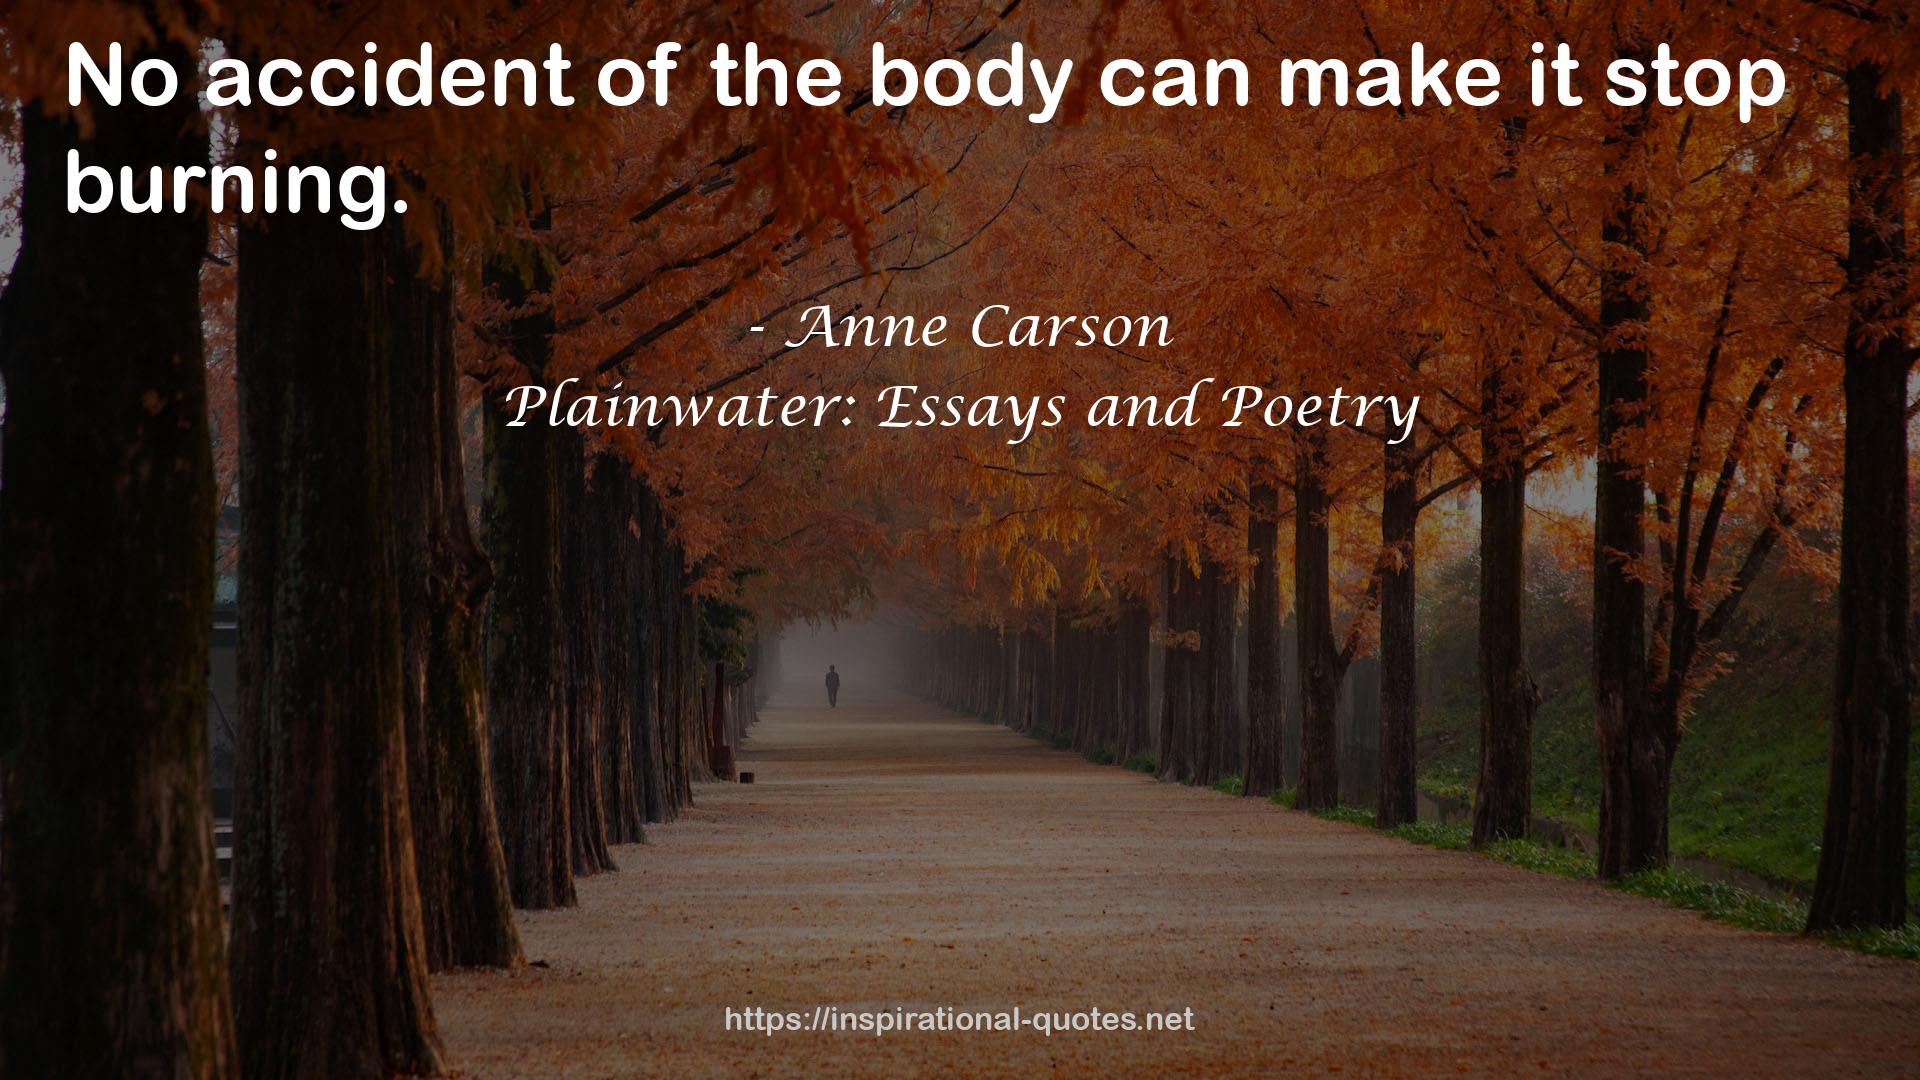 Plainwater: Essays and Poetry QUOTES